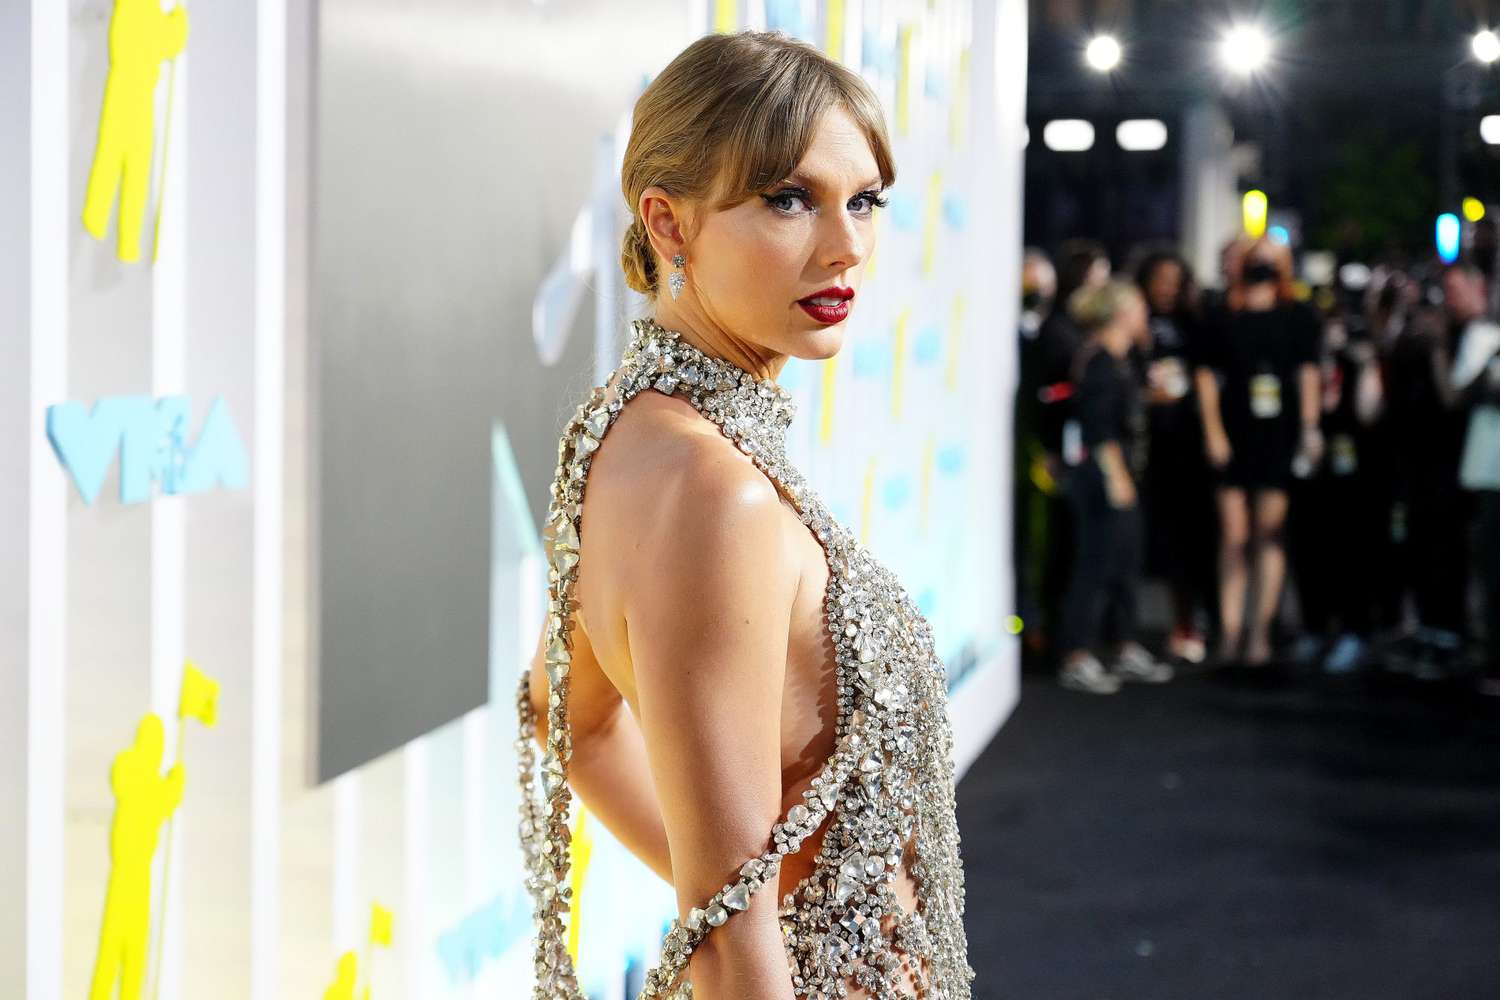 daniel reindorf recommends taylor swift bare boobs pic